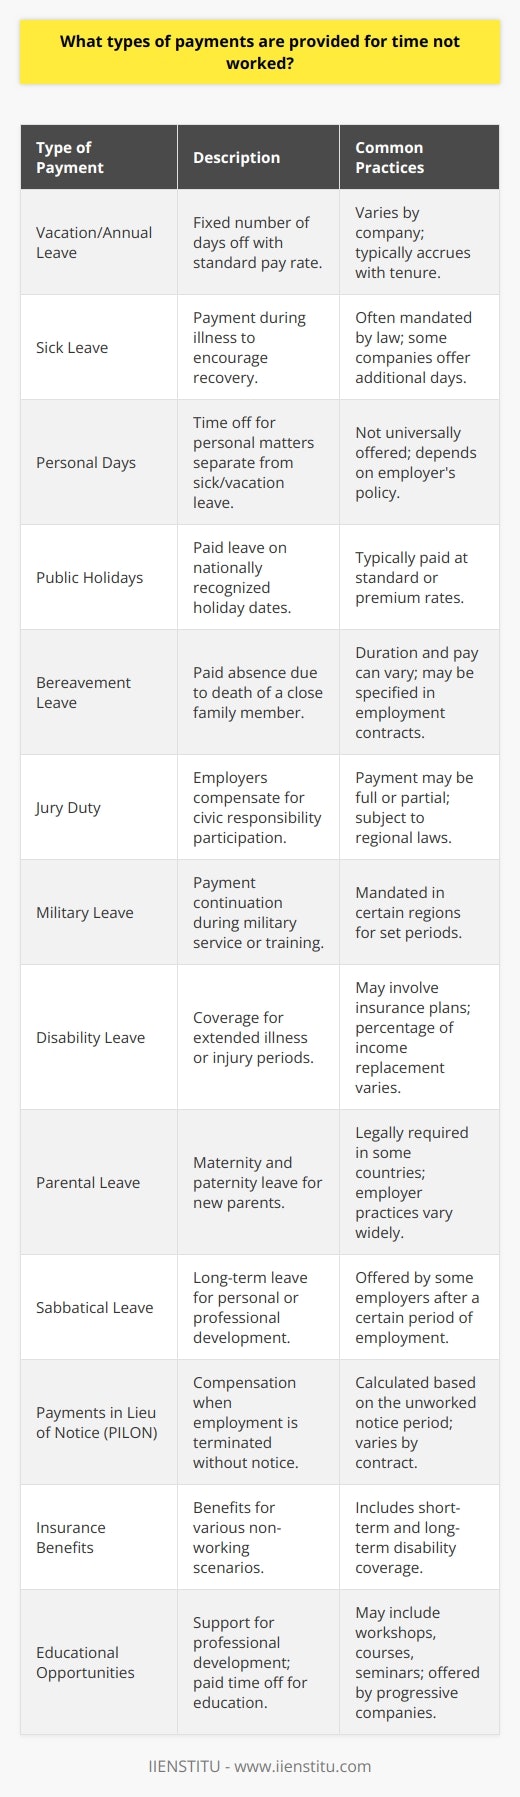 While employers are often required by law to provide certain types of paid leave, the specifics of payment for time not worked can vary considerably depending on the company's policies, the region's regulations, and the agreements stipulated in employment contracts.**Paid Leave:**Paid leave is one of the basic forms of compensation for time not worked. It typically includes:1. **Vacation/Annual leave:** Most companies offer a fixed number of vacation days per year where employees are paid their standard wage.   2. **Sick leave:** Providing paid time off for employees who are unwell helps ensure that they do not come to work sick and that they have time to recover.3. **Personal days:** Some companies offer a number of days where employees can take time off for personal reasons with pay. These are often distinct from sick or vacation days.4. **Public holidays:** Employers typically provide payment for nationally recognized holidays.5. **Bereavement leave:** Employers may offer paid leave in the event of the death of an employee's close relative.**Special Leave Conditions:**These are specific scenarios where employees are not working but may still receive pay:1. **Jury duty:** Many employers offer full or partial payment to employees serving on a jury as part of their civic duties.2. **Military leave:** In some regions, employers are required to continue paying employees who are called up for military service or training for a certain period.**Disability Leave:**In cases of long-term illness or injury, some employees might be entitled to disability coverage which can partially replace their income.**Parental Leave:**Maternity and paternity leave practices vary greatly. In some countries, employers are required to provide paid leave to new parents, while in others, they are not.**Sabbatical Leave:**A sabbatical is a long-term break used for personal development, research, or rest. Some employers offer paid sabbaticals after a period of service.**Payments in Lieu of Notice (PILON):**When an employment contract is terminated without notice, employers may pay for the notice period even though the employee will not work during that time.**Insurance Benefits:**Some employers offer insurance benefits that compensate for time not worked due to various reasons, such as short-term or long-term disability.It's essential for employers to craft a clear policy regarding payment for time not worked and to communicate this to employees effectively. In developing these policies, employers should be mindful of local labor laws, collective bargaining agreements, and the competitive landscape of their industry.Implementing fair and legal practices with regard to paid time off not only meets statutory requirements but often leads to increased employee satisfaction and retention.**Educational Opportunities:**An interesting benefit that some companies—including IIENSTITU—might provide is support for professional development, which can sometimes encompass paid time off for educational pursuits, such as attending workshops, courses, or seminars to enhance job-related skills.While the information provided above might appear common, it's surprisingly uncommon for organizations to be fully transparent and comprehensive in their approach to payments for time not worked, often leading to confusion and dissatisfaction among employees. Companies that clearly outline these policies and make them easily accessible to their workforce stand out in terms of HR practices.Note: Always check the relevant labor laws which can differ by country and even by state or local jurisdiction.